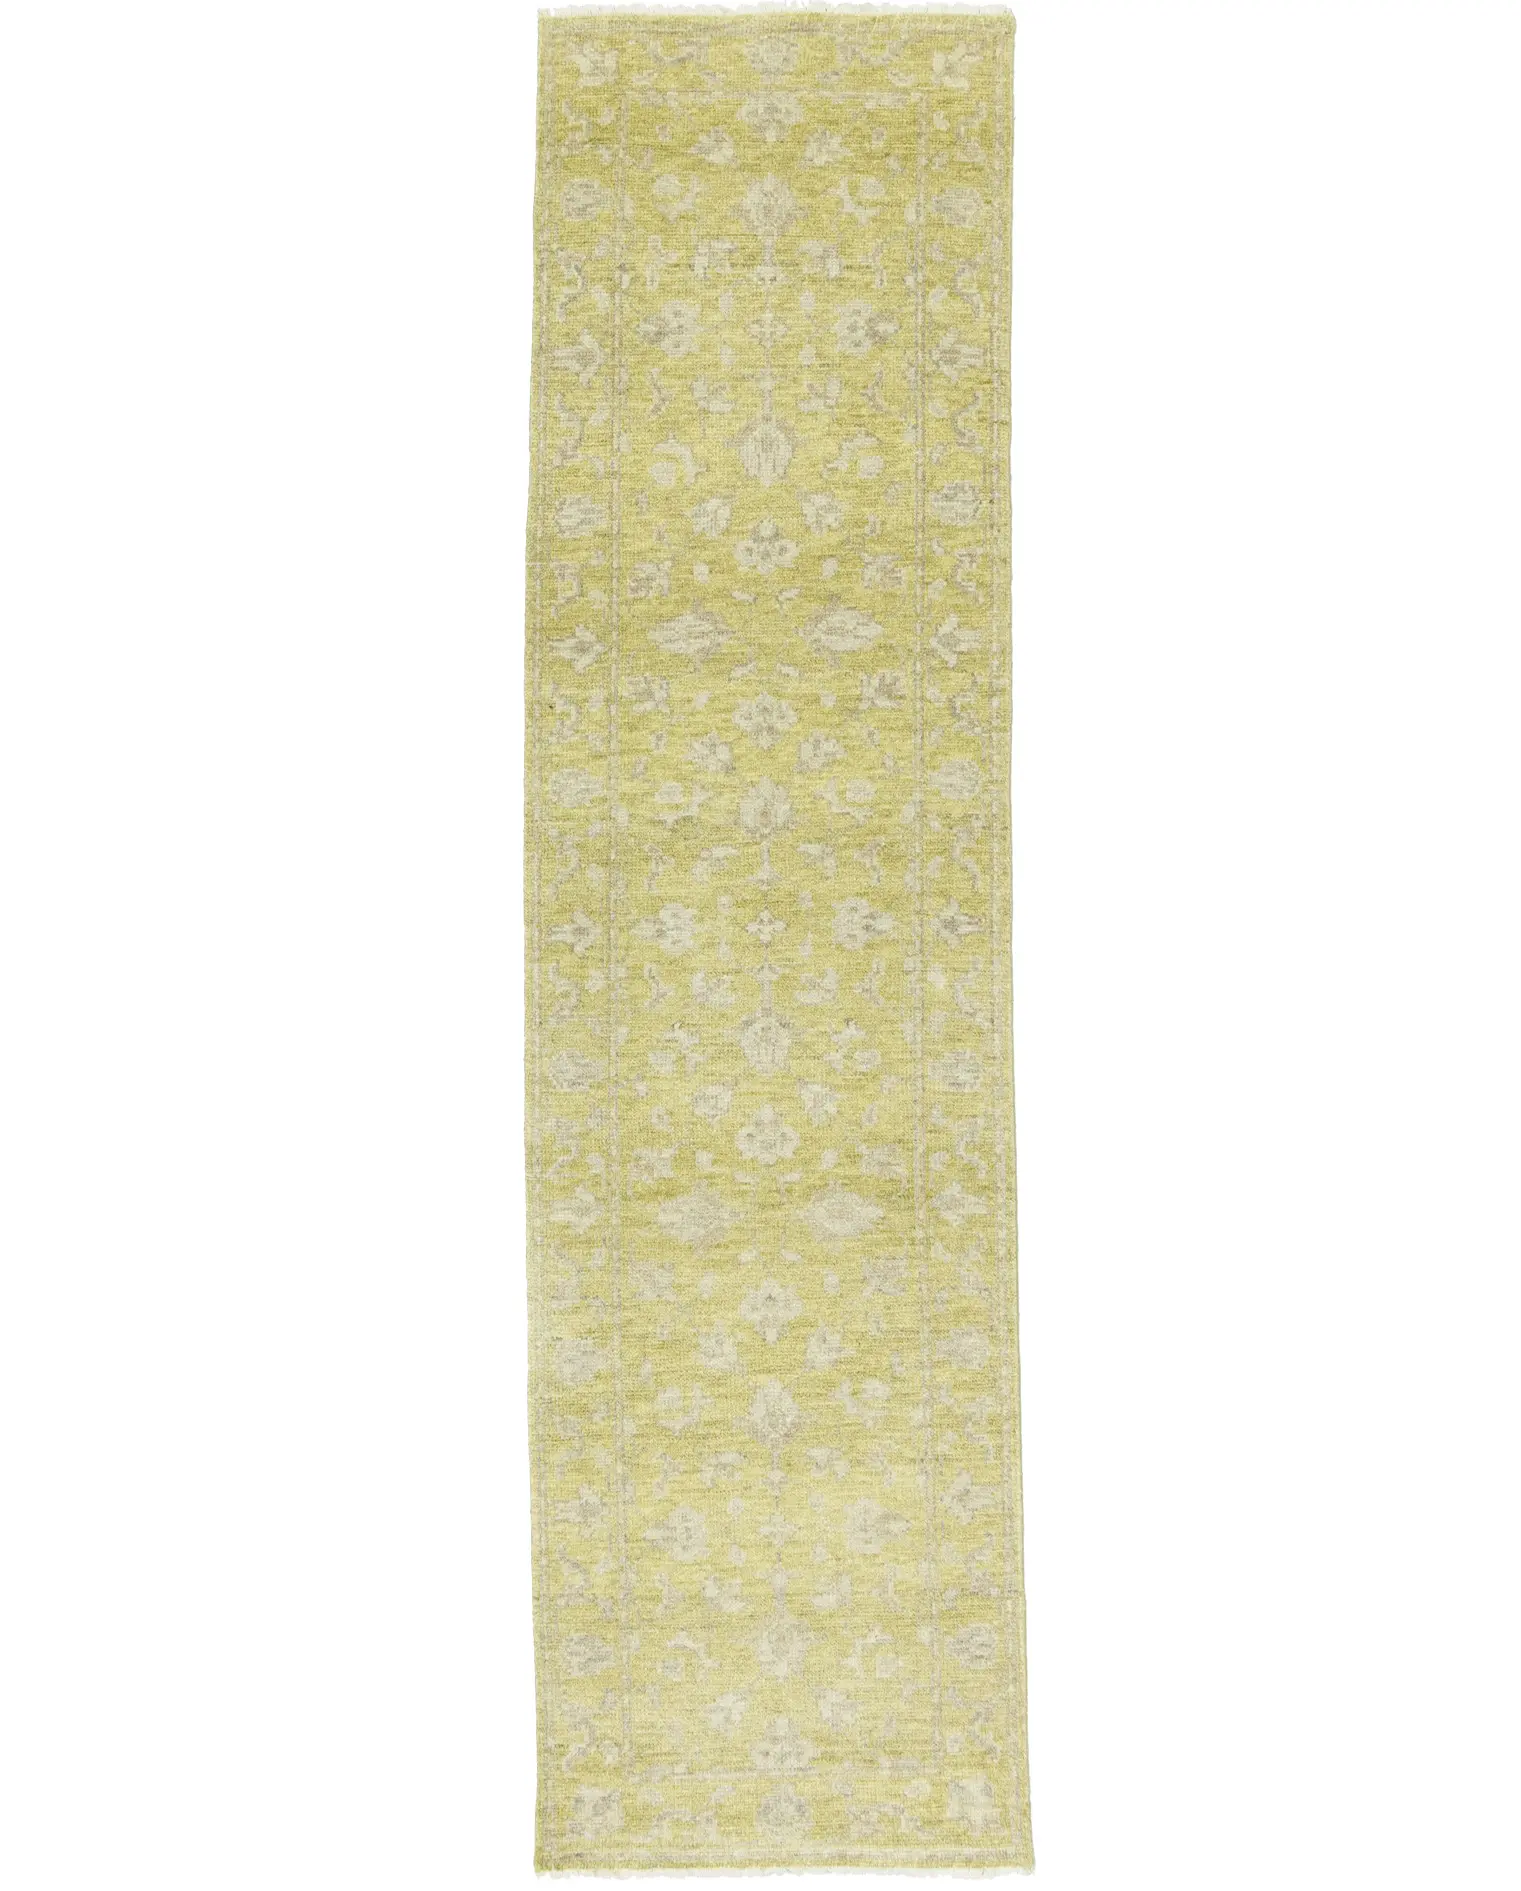 Muted Golden Yellow Floral 3X10 Transitional Oriental Runner Rug